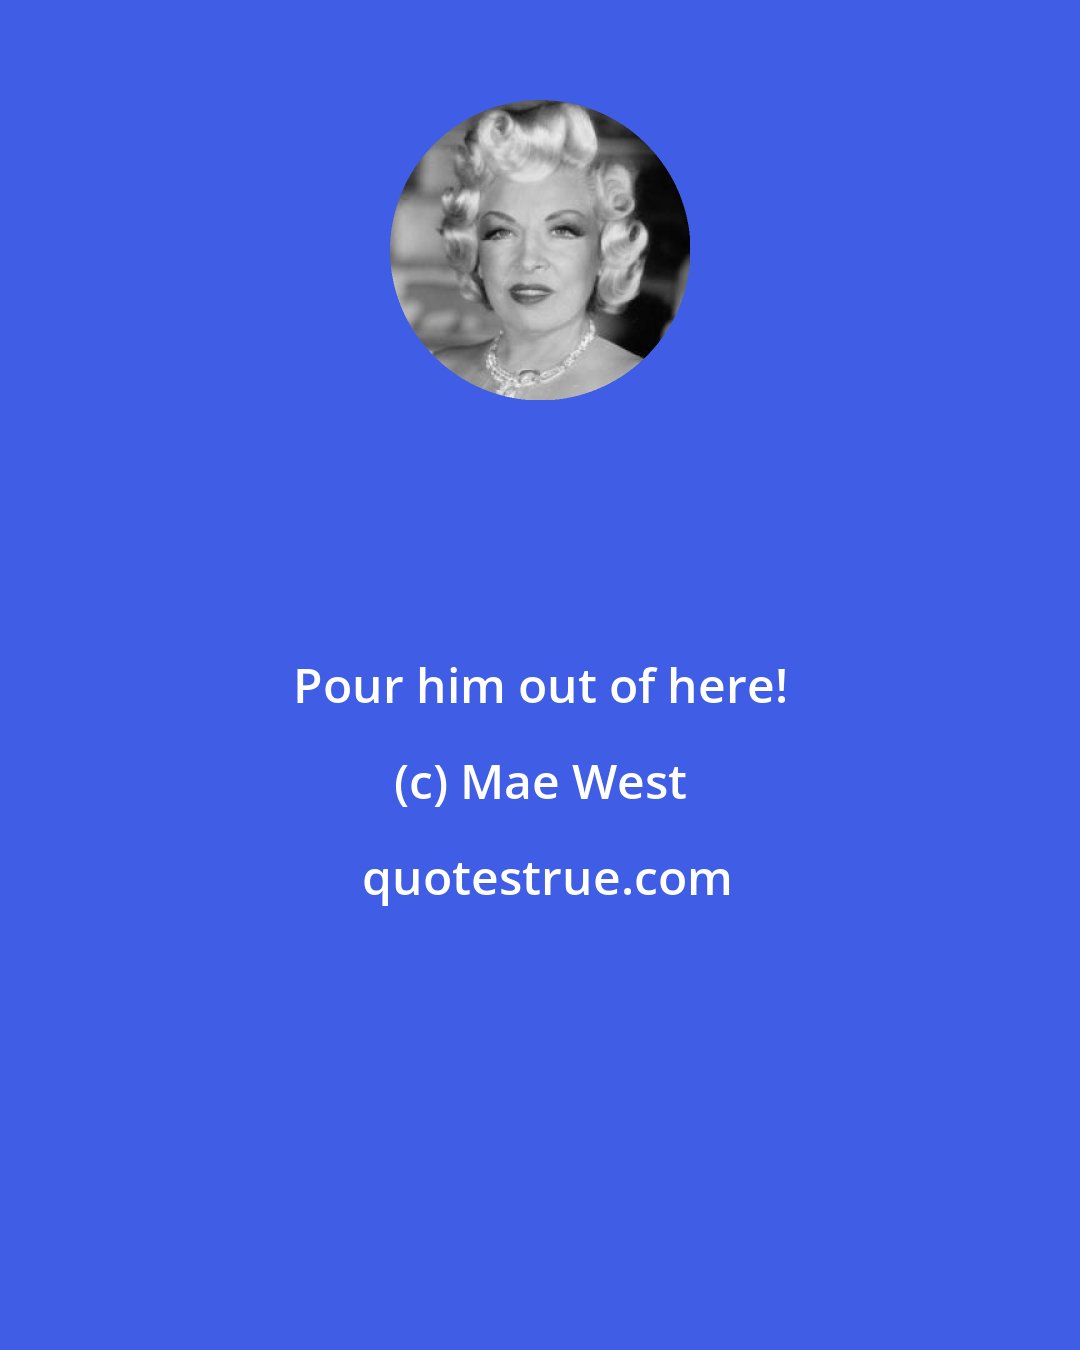 Mae West: Pour him out of here!